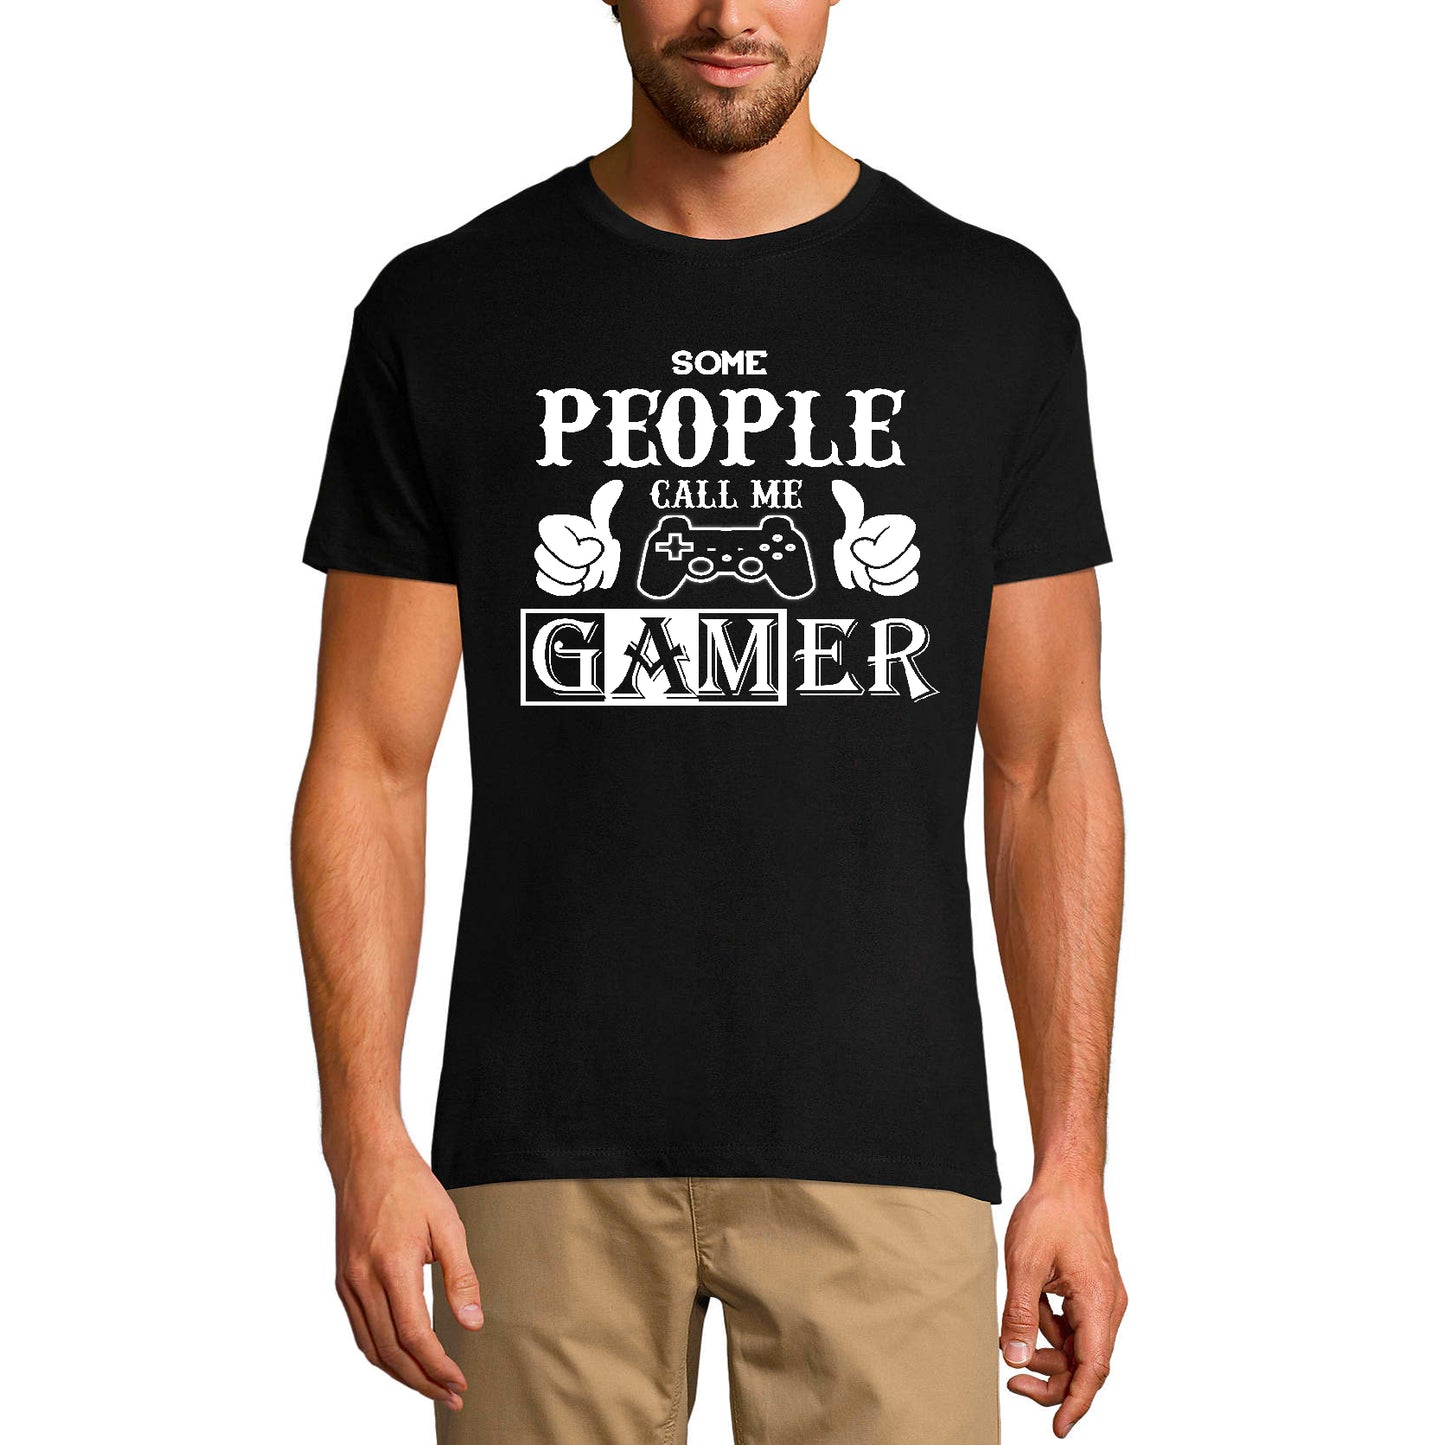 ULTRABASIC Graphic Men's T-Shirt Some People Call Me Gamer - Computer Gamer Gifts gamer lives matter quote dad gamer i paused my game alien player ufo playstation tee shirt clothes gaming apparel gifts super mario nintendo call of duty graphic tshirt video game funny geek gift for the gamer fortnite pubg humor son father birthday